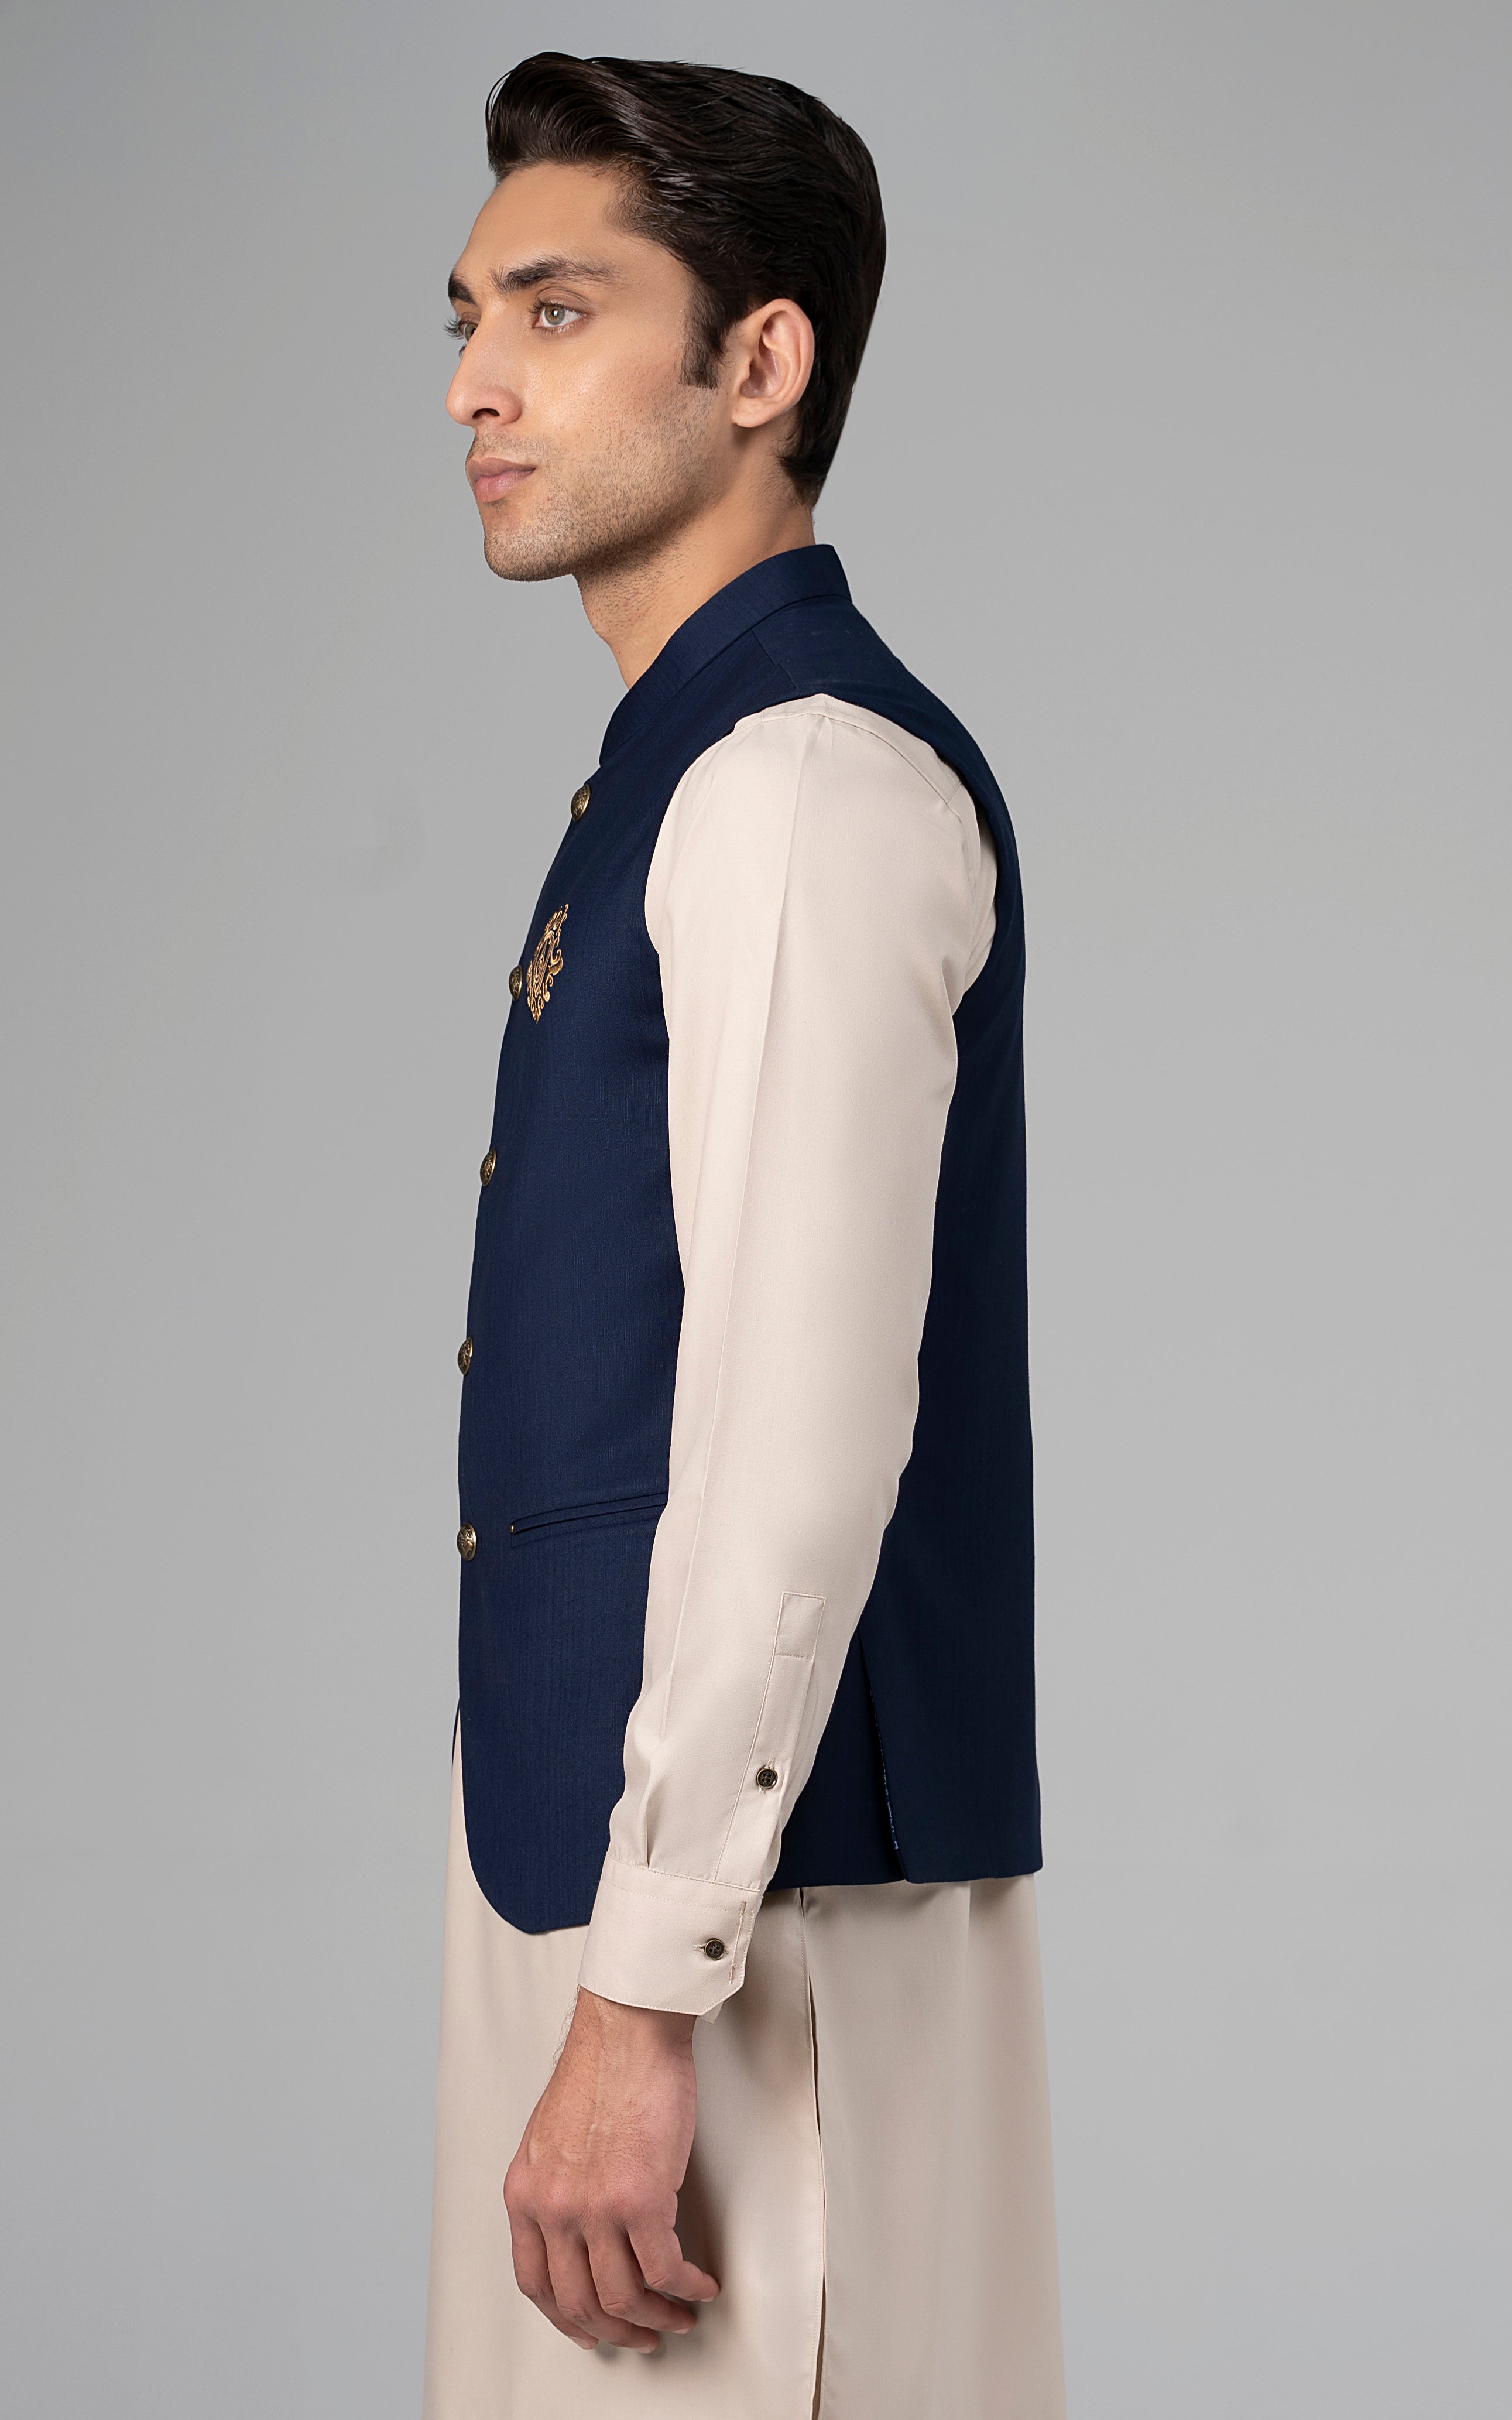 TROPICAL LOGO EMBROIDERED WAISTCOAT -SIGATURE COLLECTION NAVY